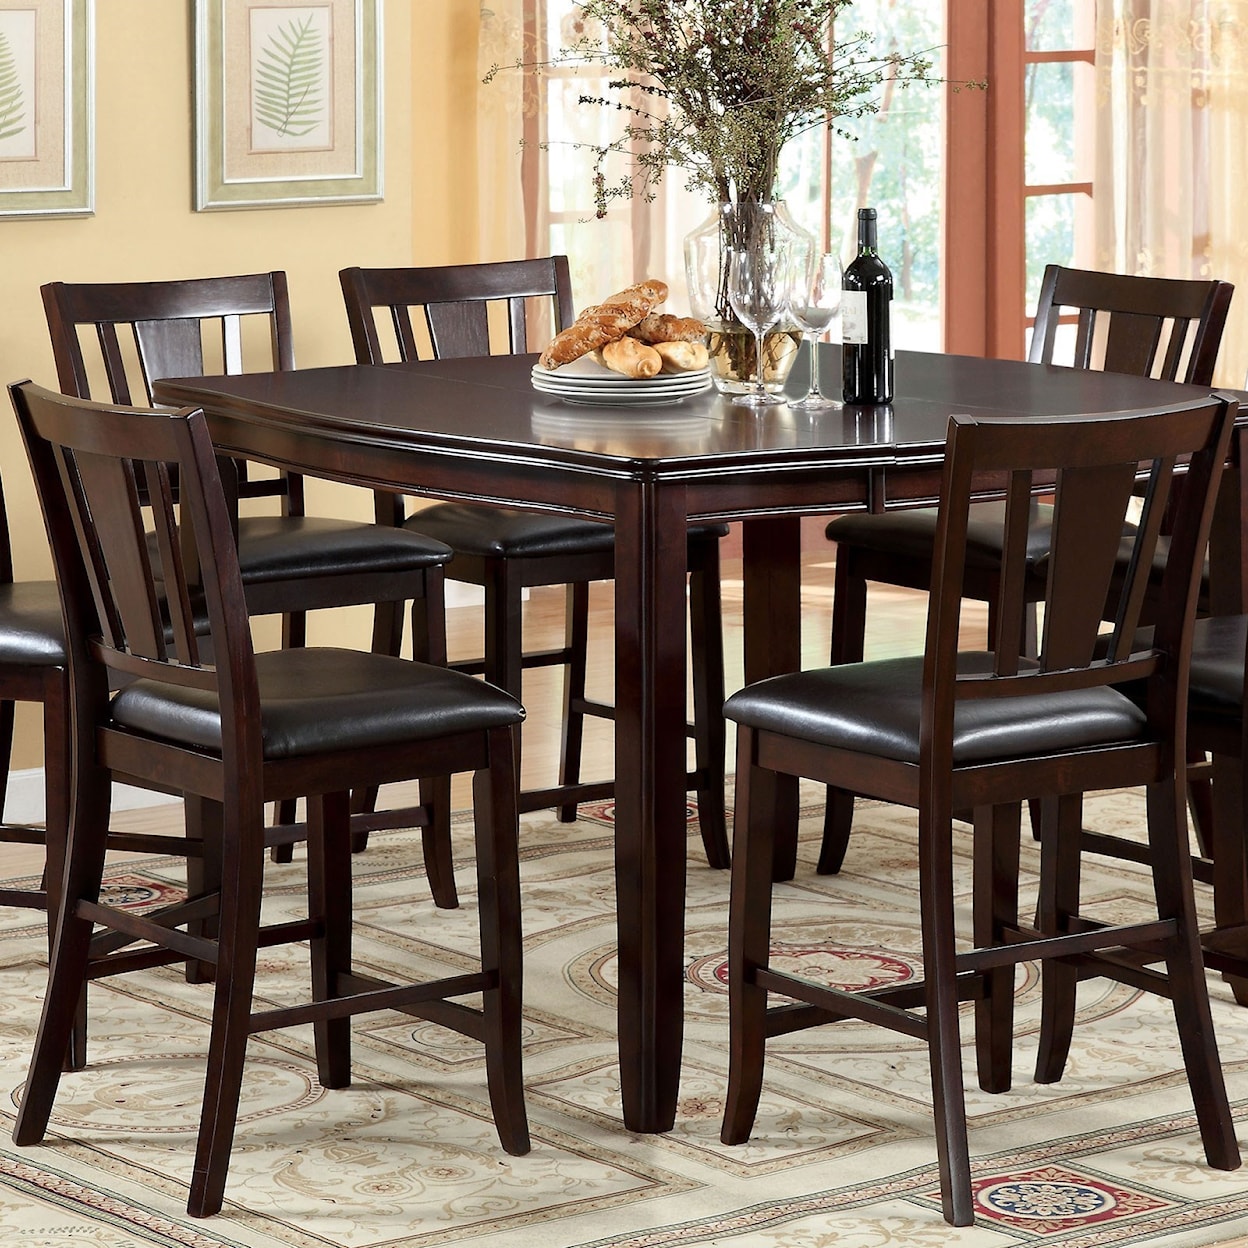 Furniture of America Edgewood Set of Counter Height Stools